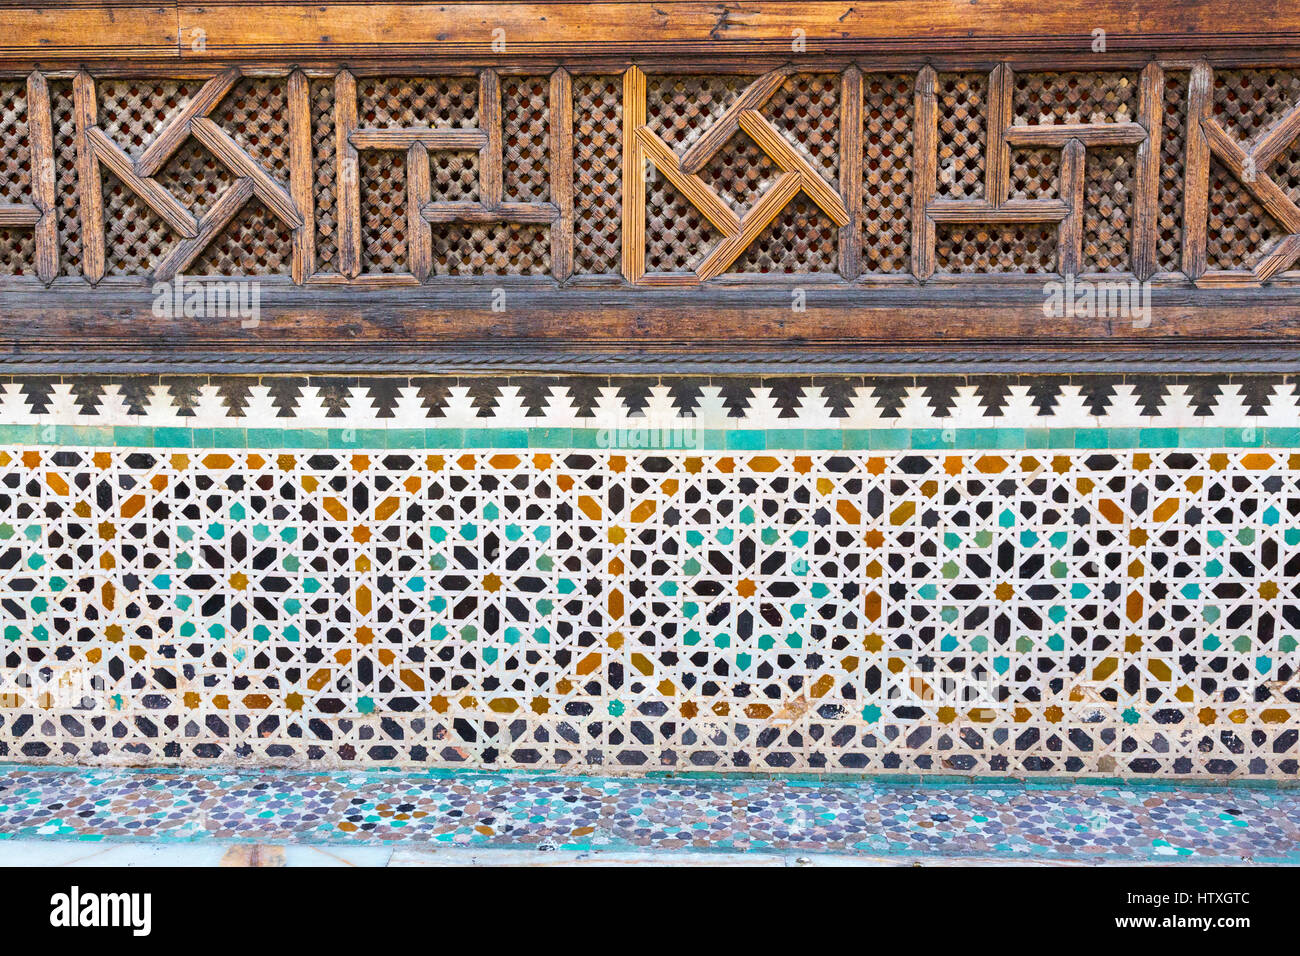 Fes, Morocco.  Medersa Bou Inania, Decorative Tile and Woodwork. Stock Photo